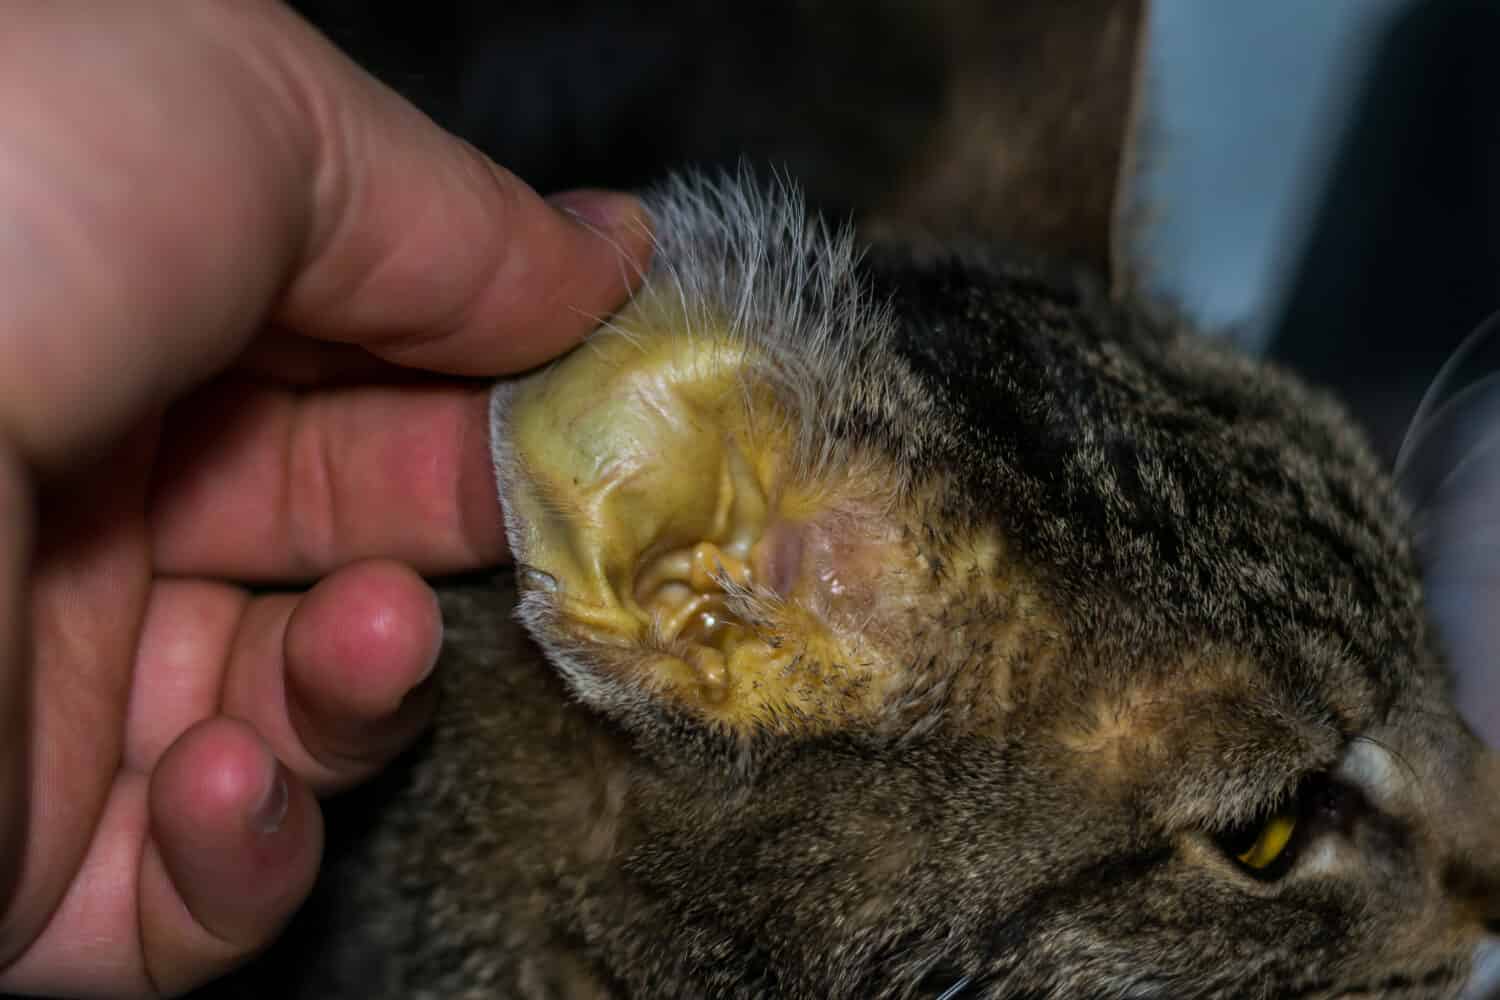 adult cat with liver faiure, jaundice skin and dehydration